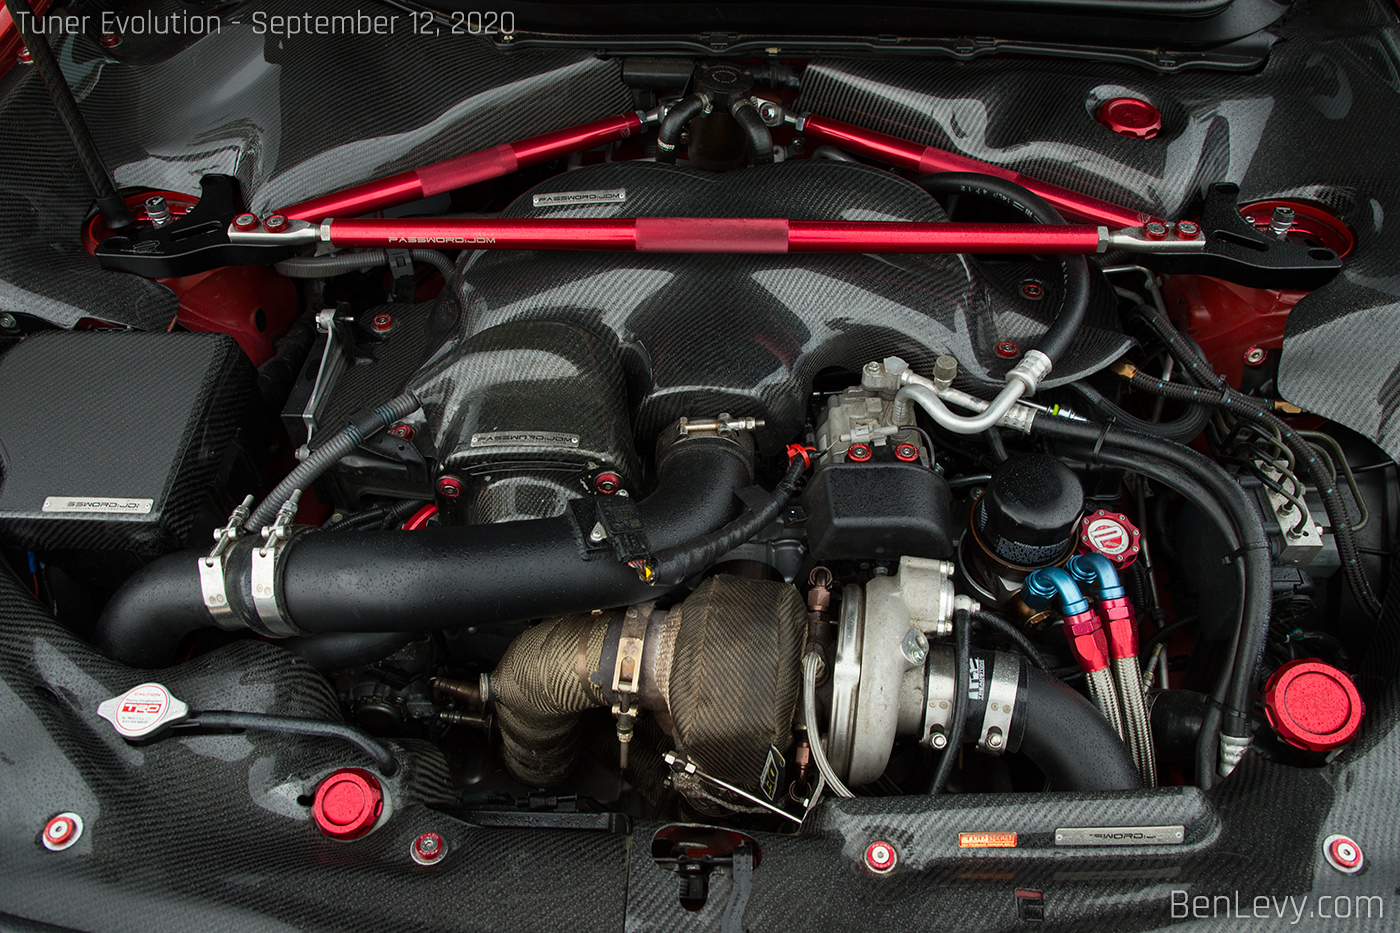 Turbo Scion FR-S with many Password JDM parts